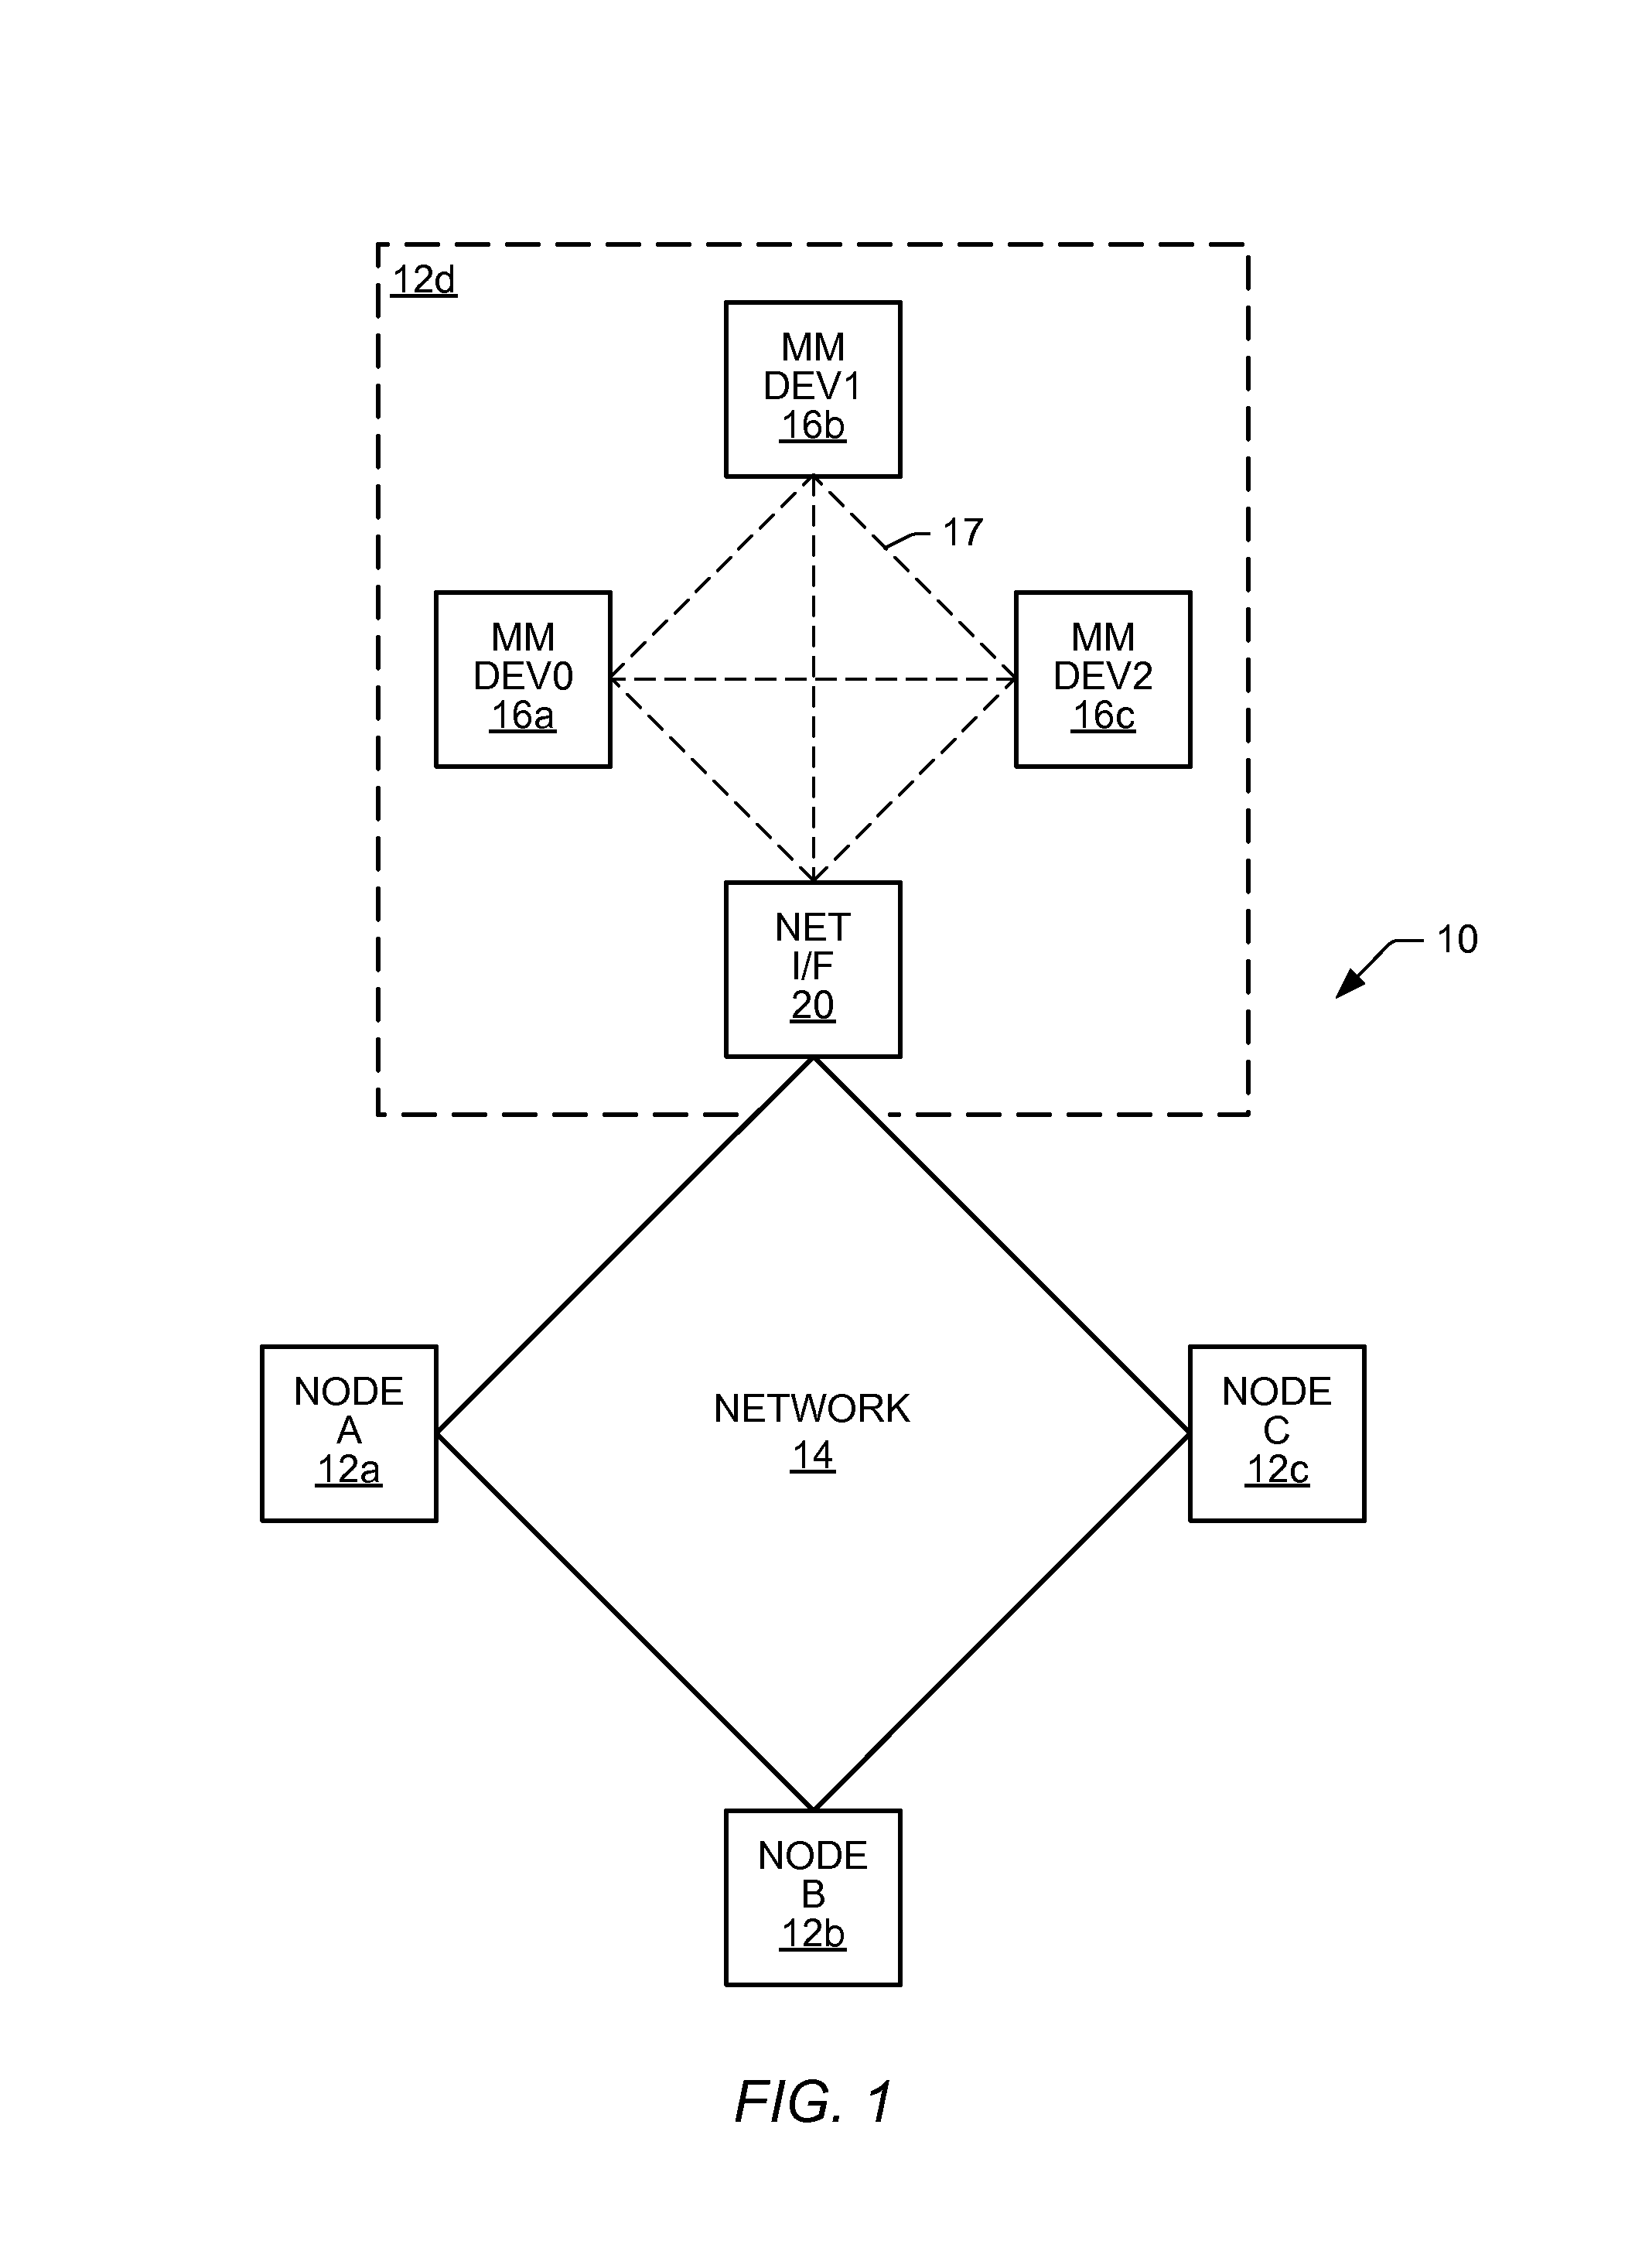 Communication system and method for sending asynchronous data and/or isochronous streaming data across a synchronous network within a frame segment using a coding violation to signify at least the beginning of a data transfer